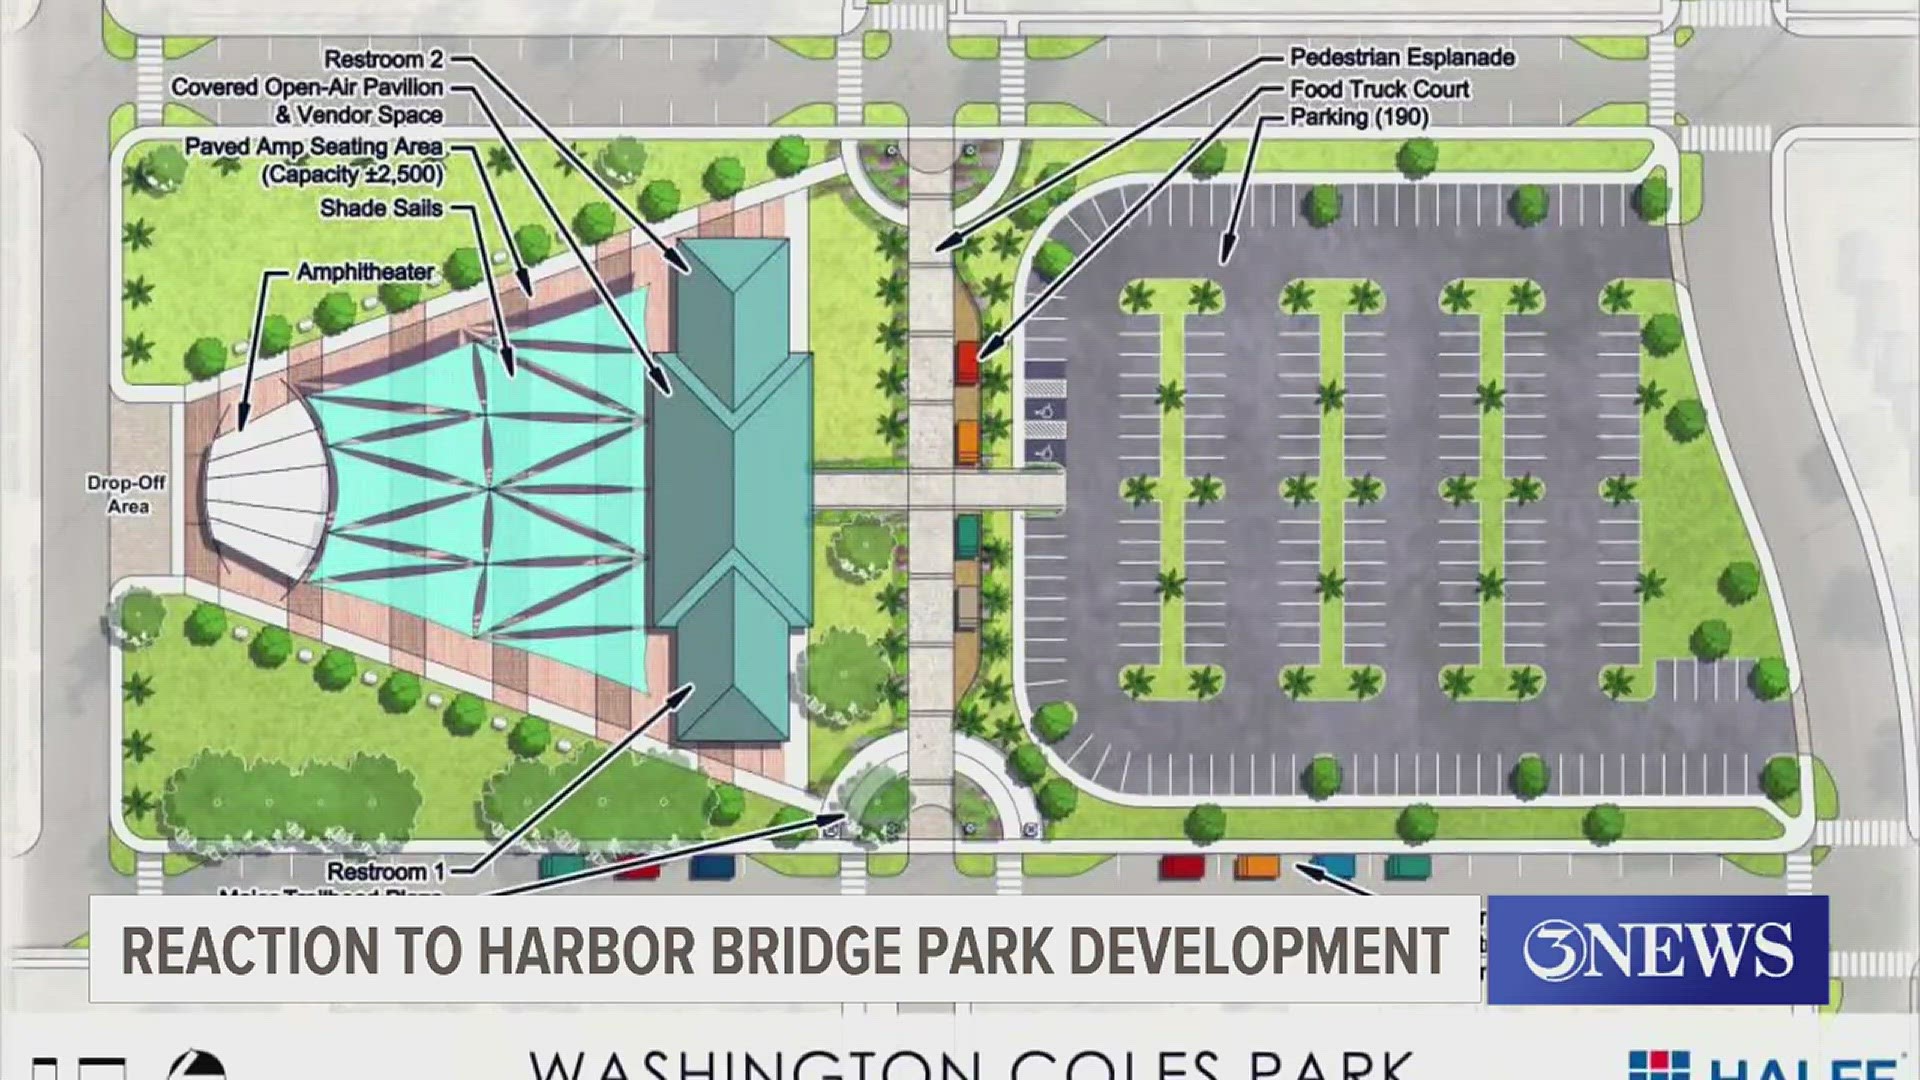 The Harbor Bridge Parks Mitigation area project is one way the city hopes to promote economic development and revitalization in the northside community.